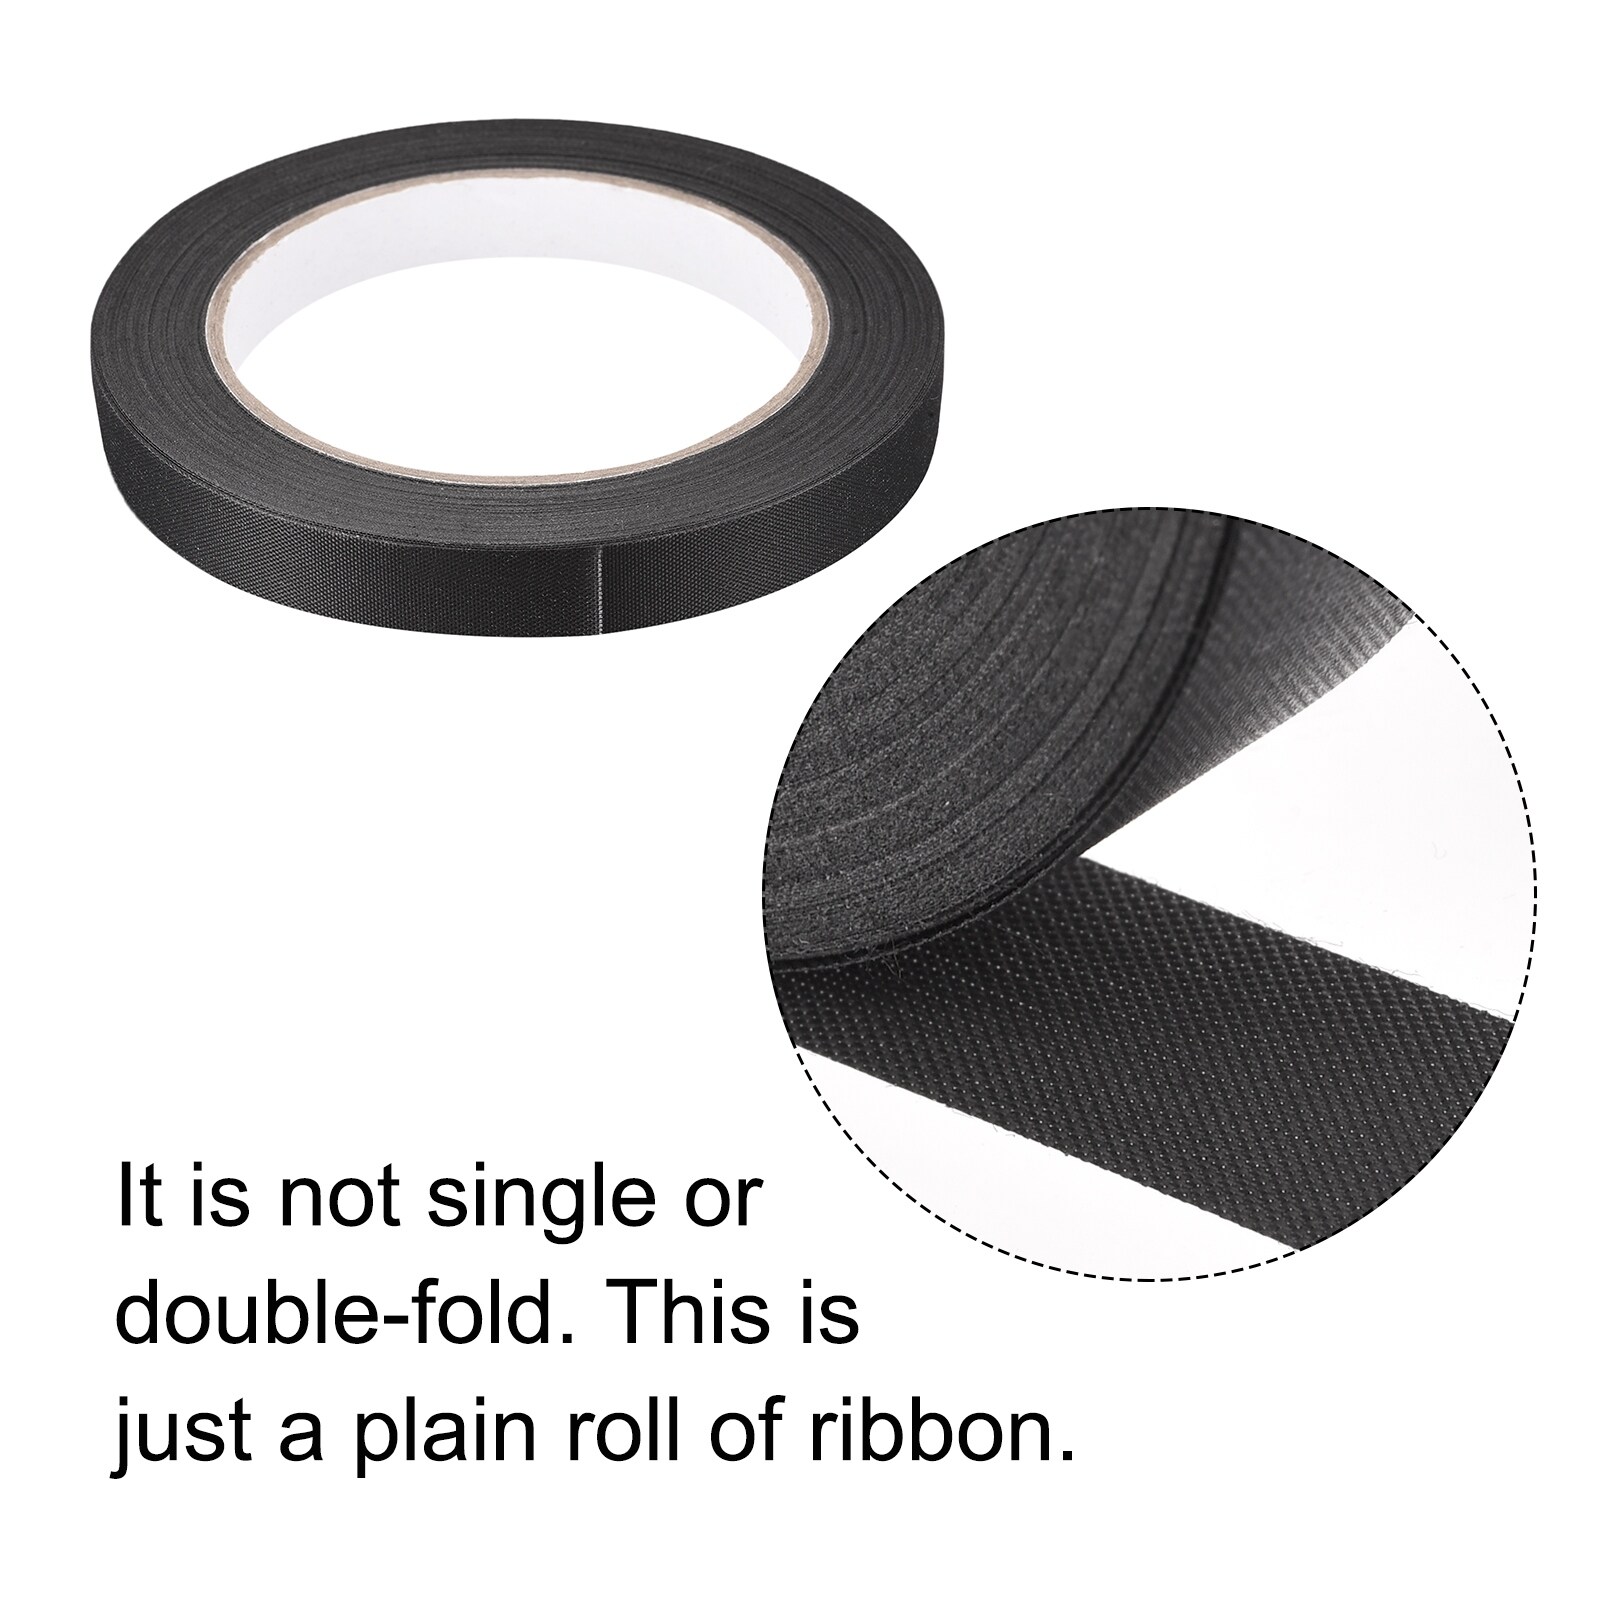 Nylon Tape Binding Closeout 9/16 Inch x 49 Yards Length for Leather Goods - Black - 9/16 Inch x 49 Yards